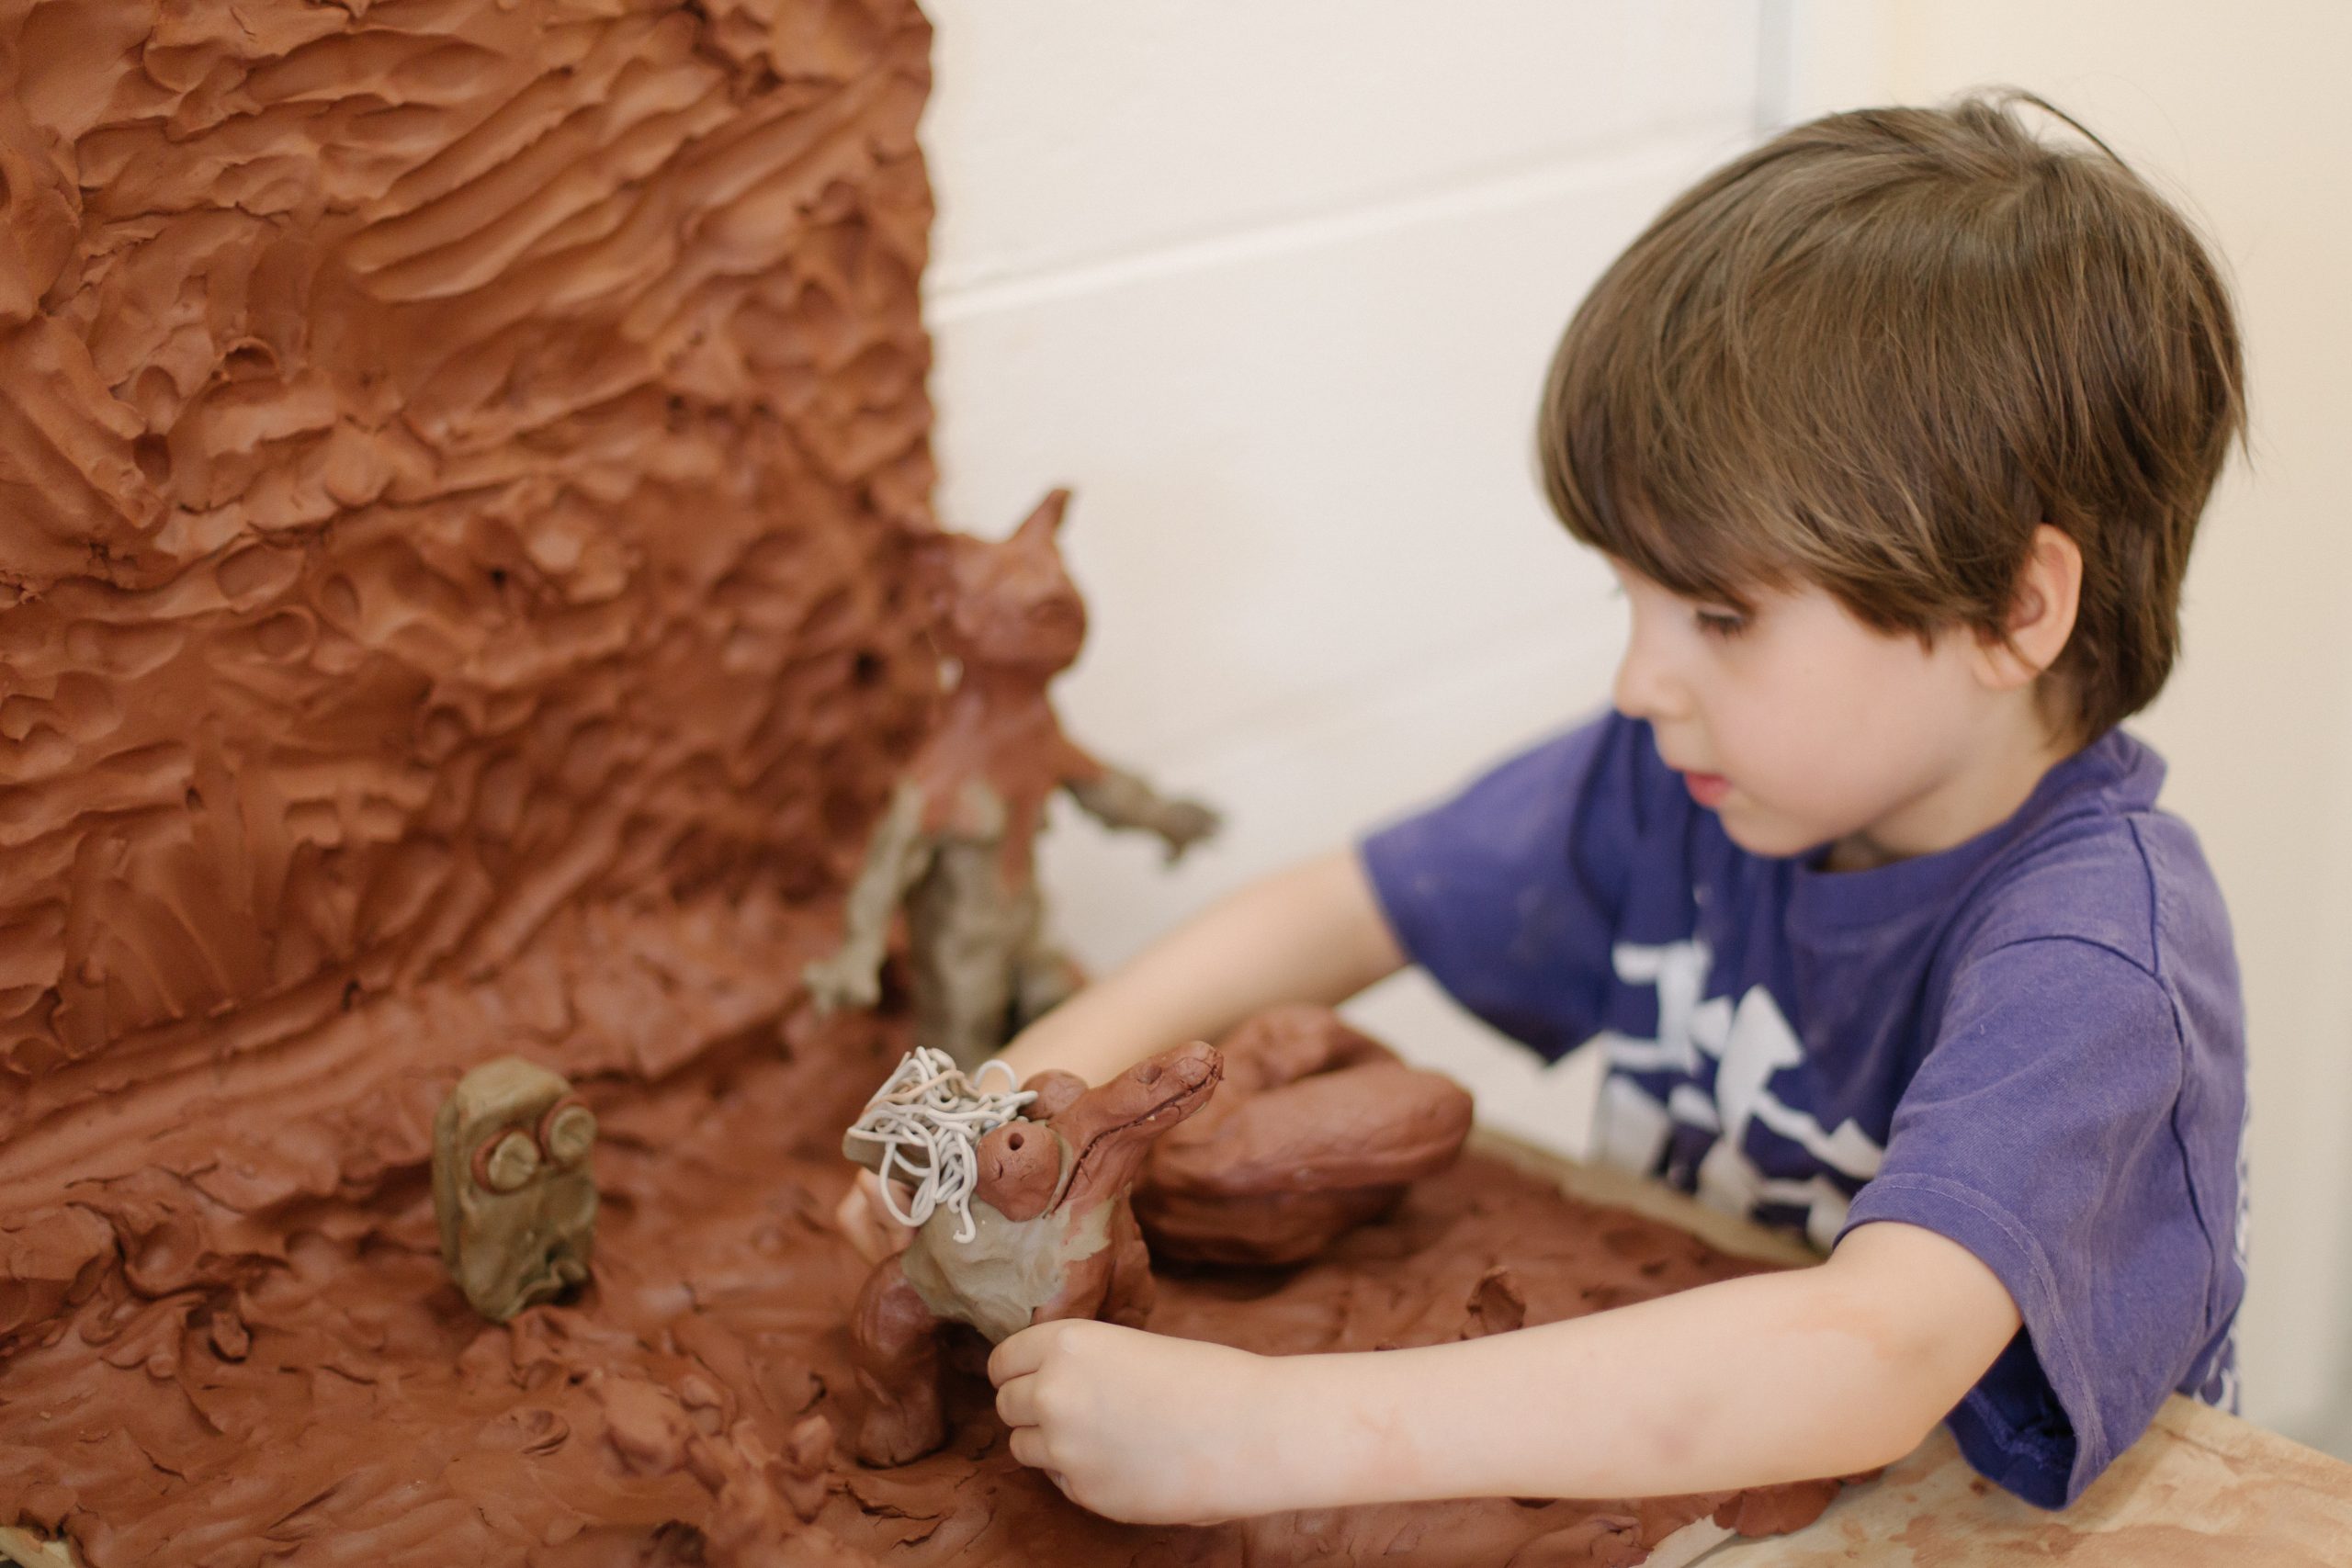 A young child add his clay character to the borwn clay diorama